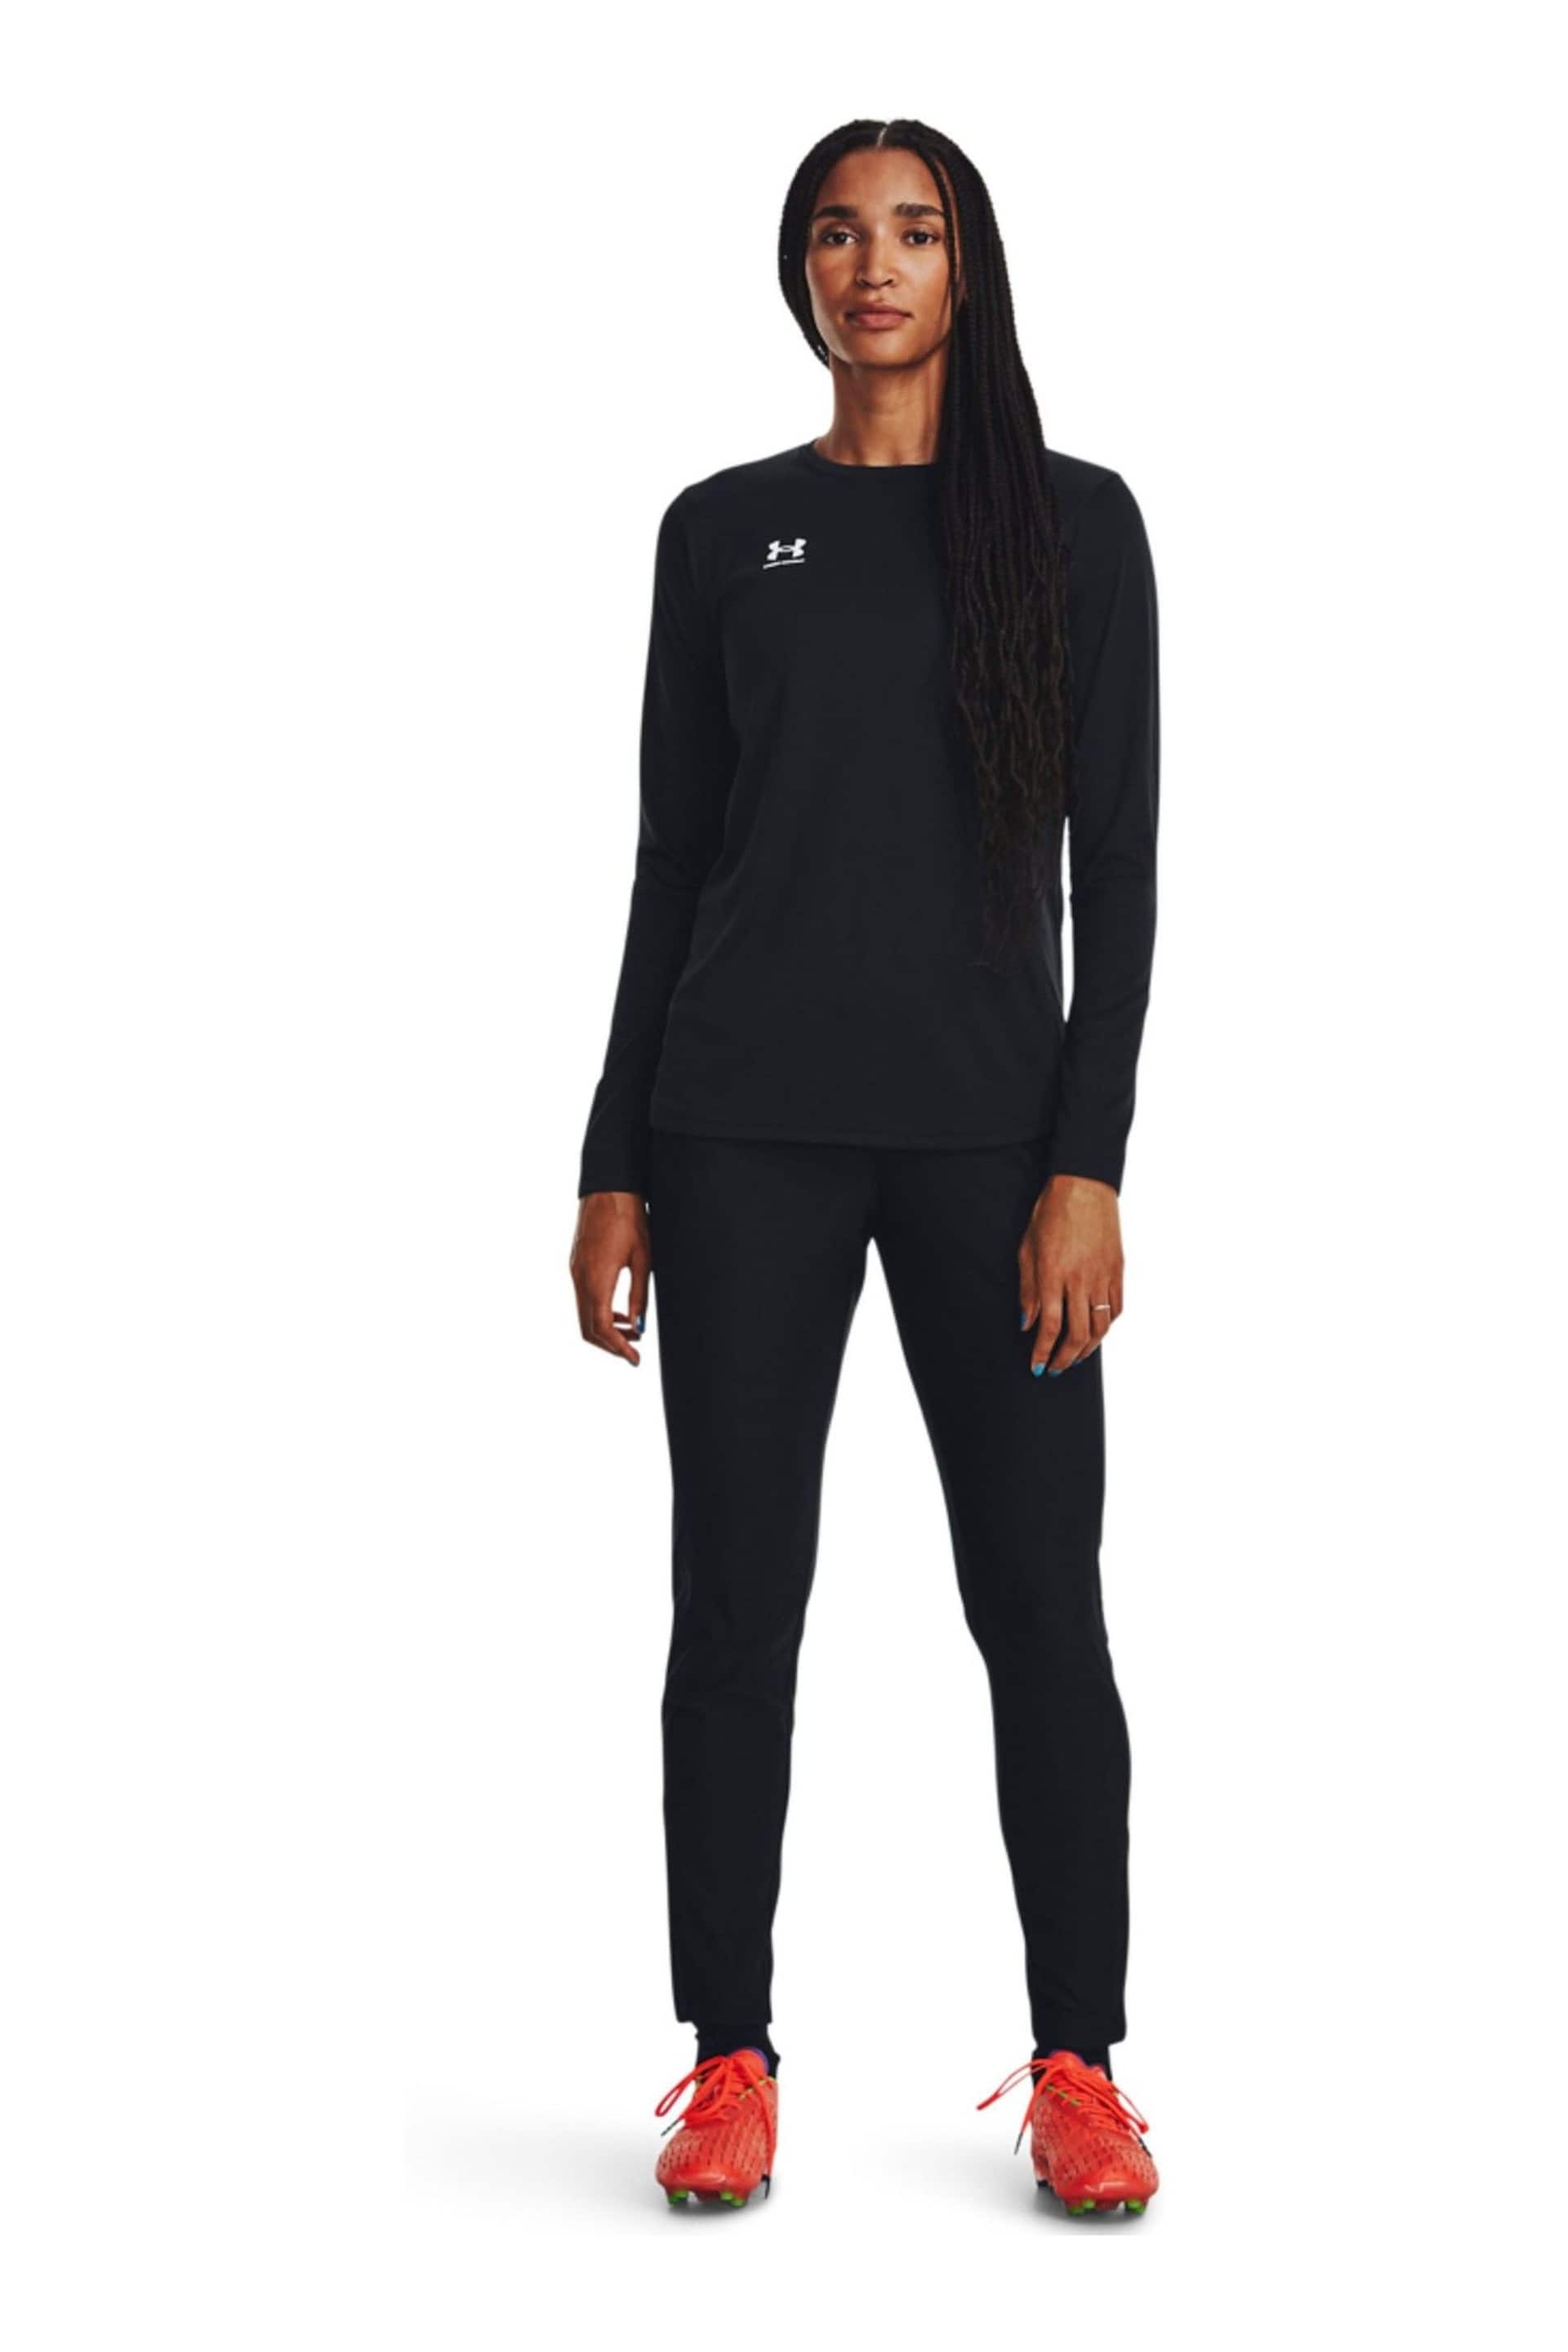 Under Armour Challenger Train Long Sleeve T-Shirt - Image 3 of 4